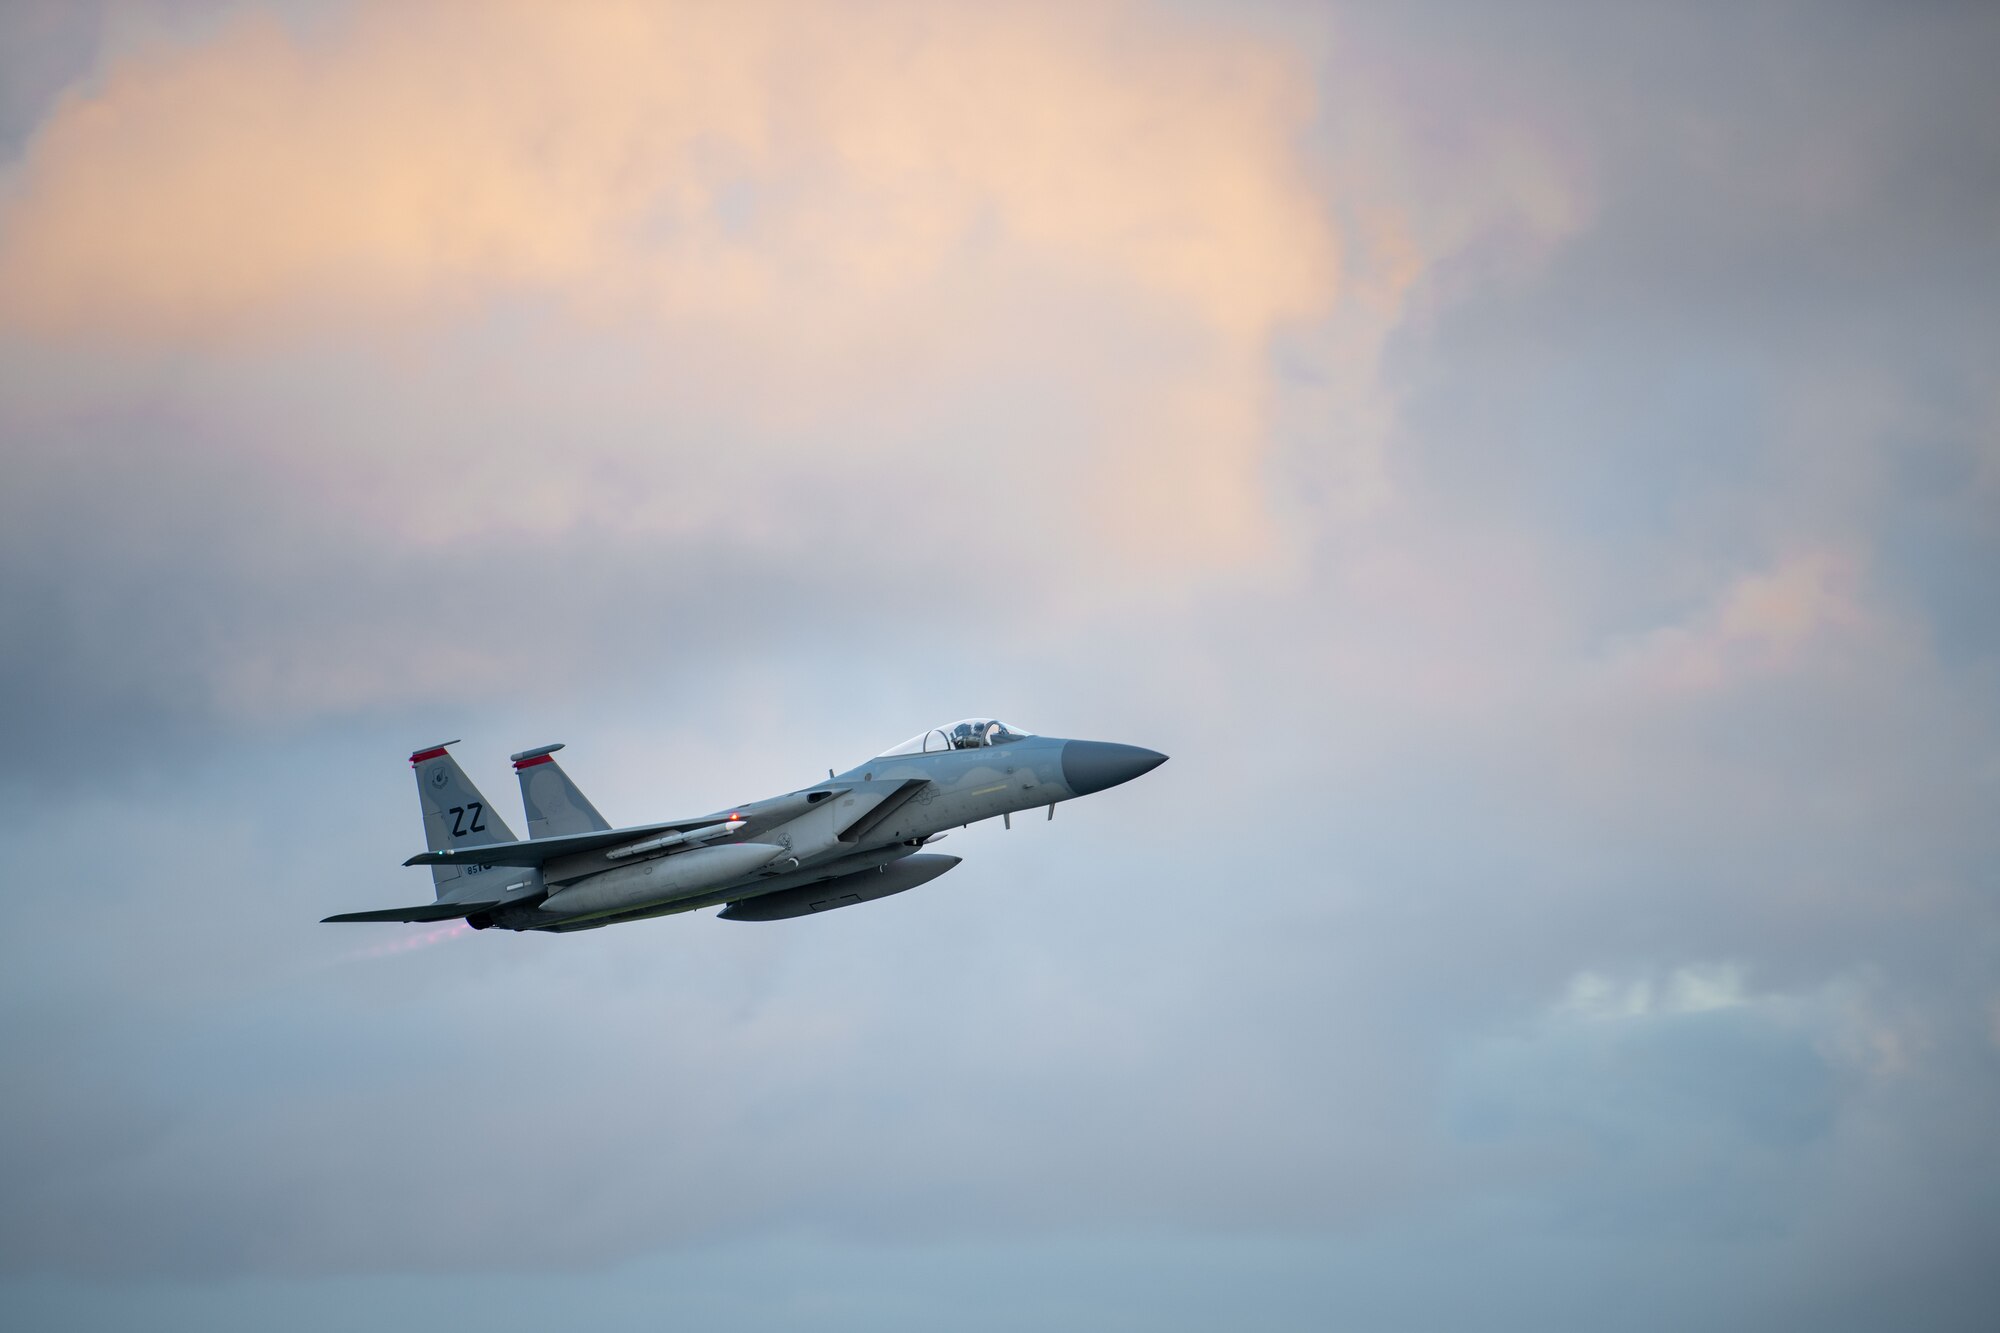 An F-15C Eagle assigned to the 67th Fighter Squadron takes off for Red Flag-Alaska at Kadena Air Base, Japan, April 15, 2022. Red Flag-Alaska is a Pacific Air Forces-directed field training exercise focused on providing unique opportunities to integrate various forces into joint, coalition and multilateral training from simulated forward operating bases.  (U.S. Air Force photo by Airman 1st Class Sebastian Romawac)